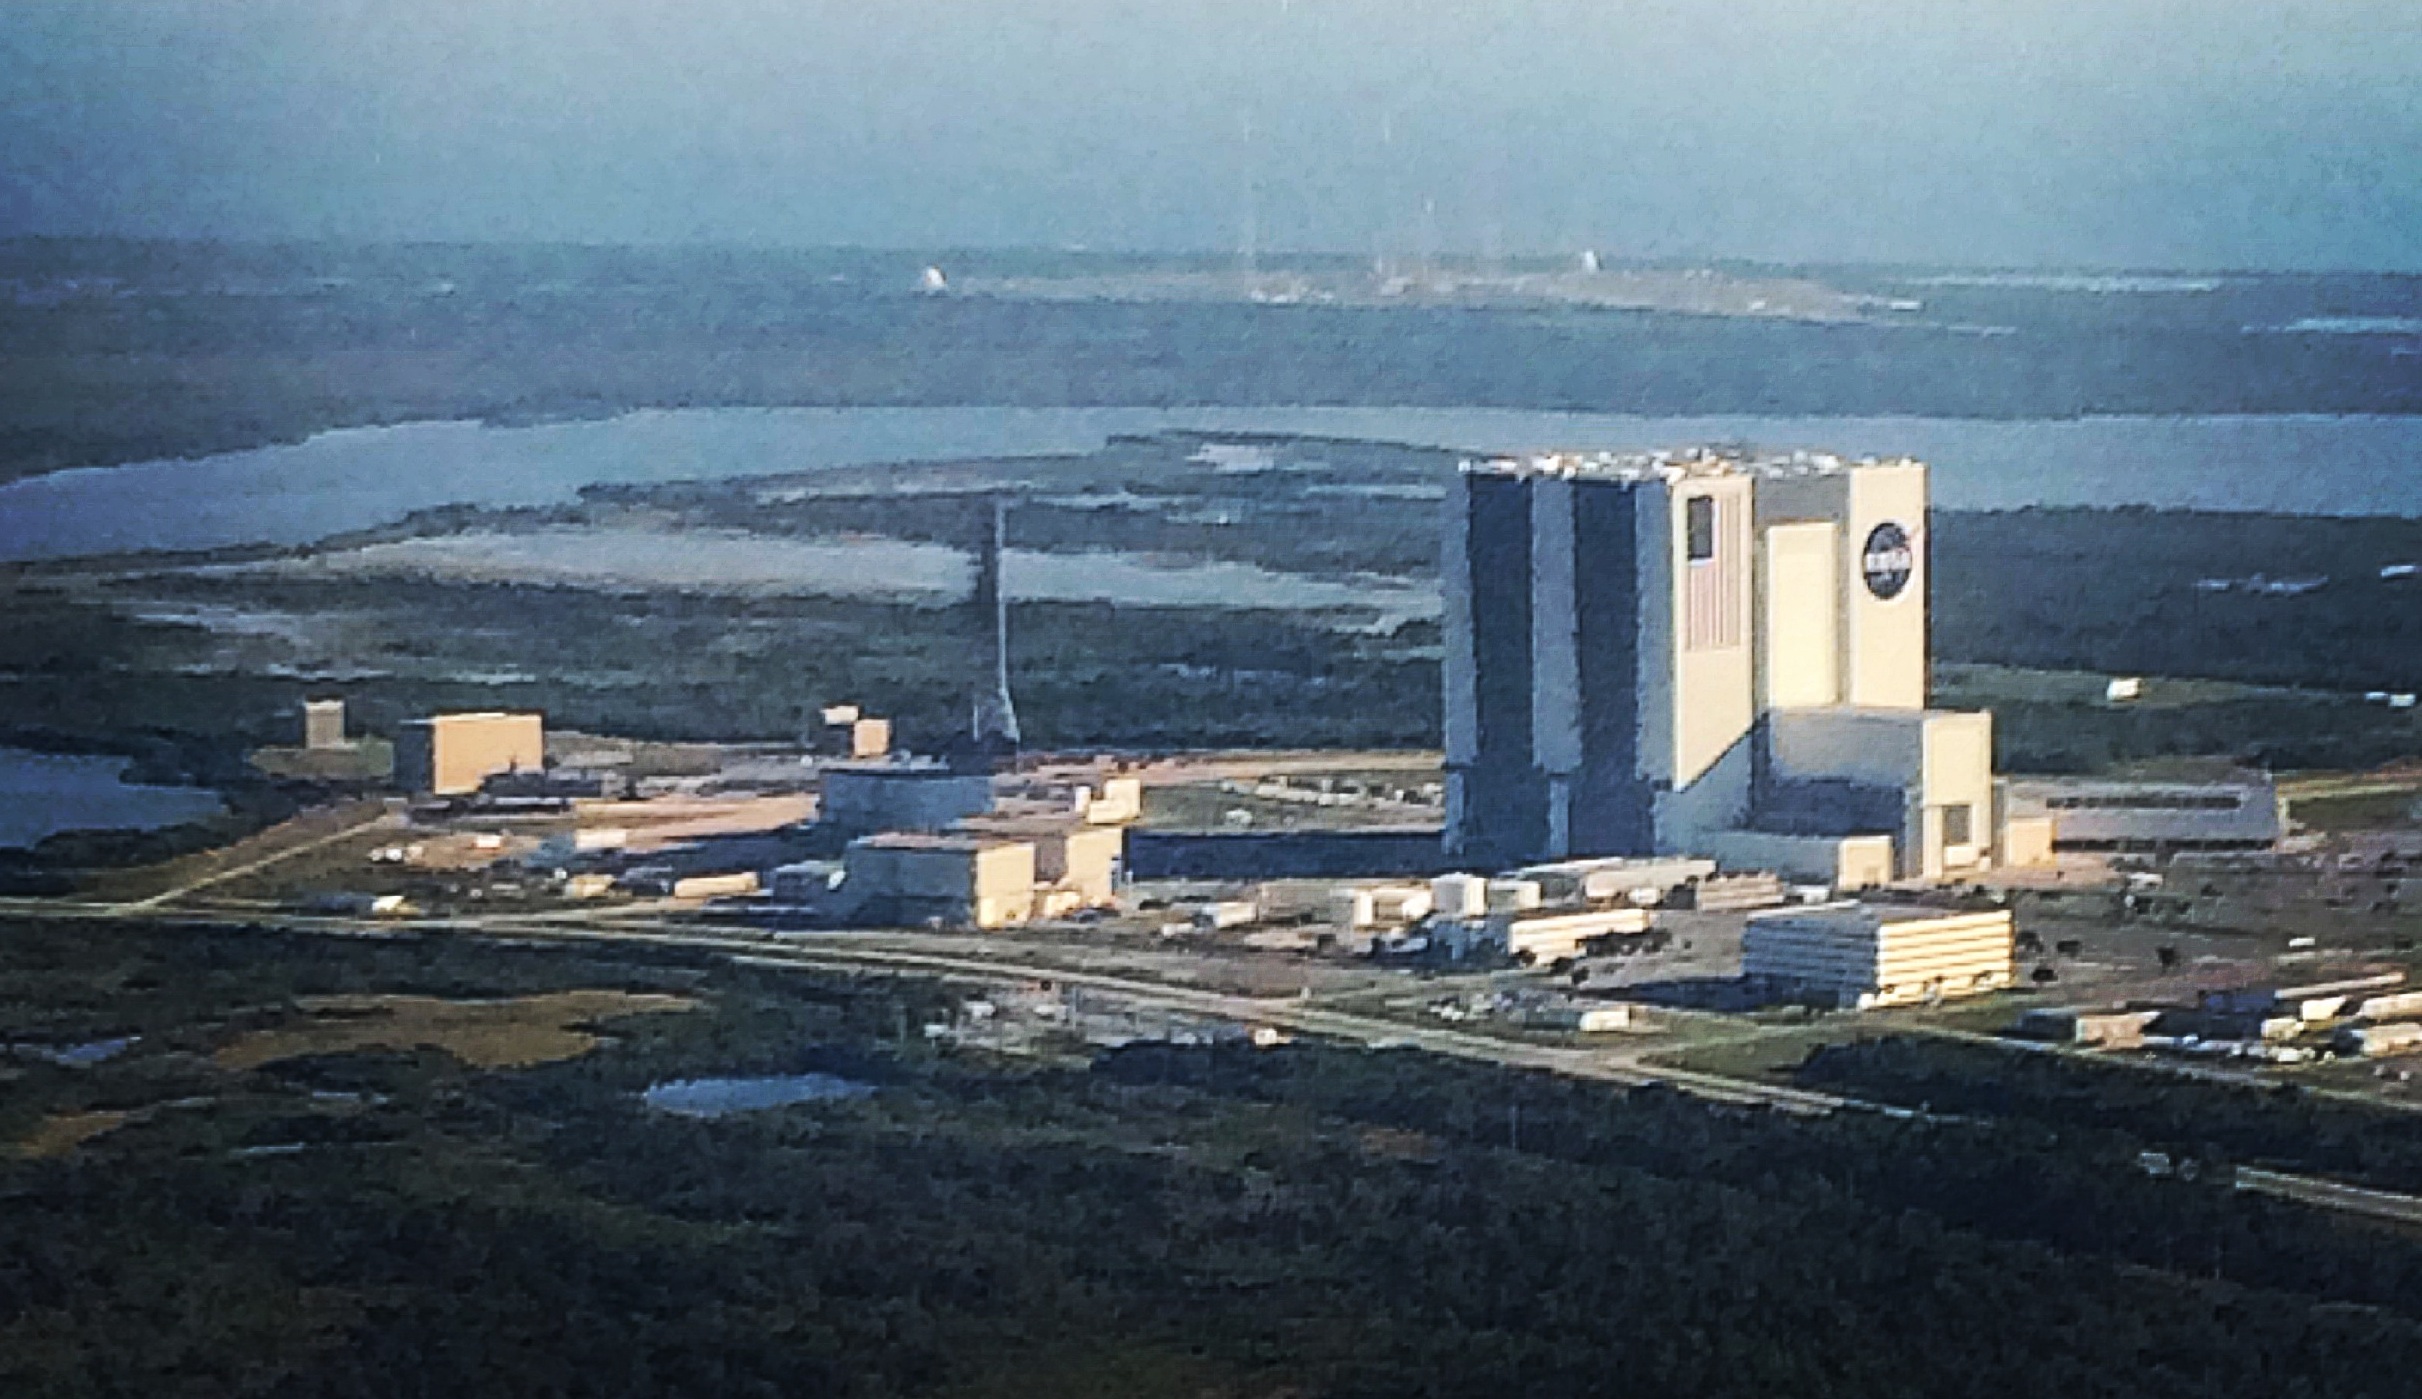 As KSC transitions to a multiuser spaceport, more and more opportunities are becoming available to businesses both big and small in the commercial space industry. Image Credit: Talia Landman / AmericaSpace 